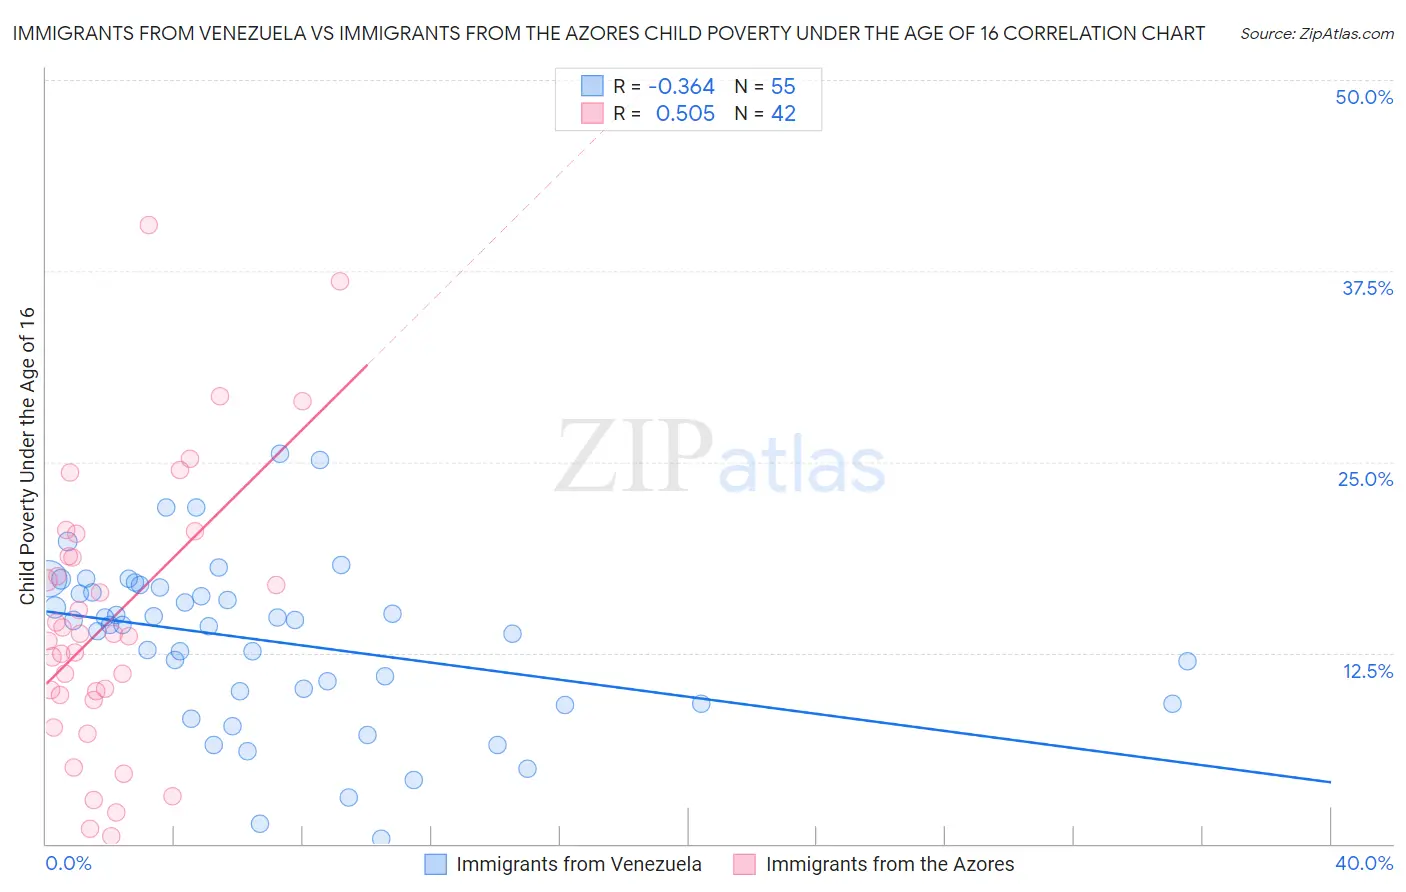 Immigrants from Venezuela vs Immigrants from the Azores Child Poverty Under the Age of 16